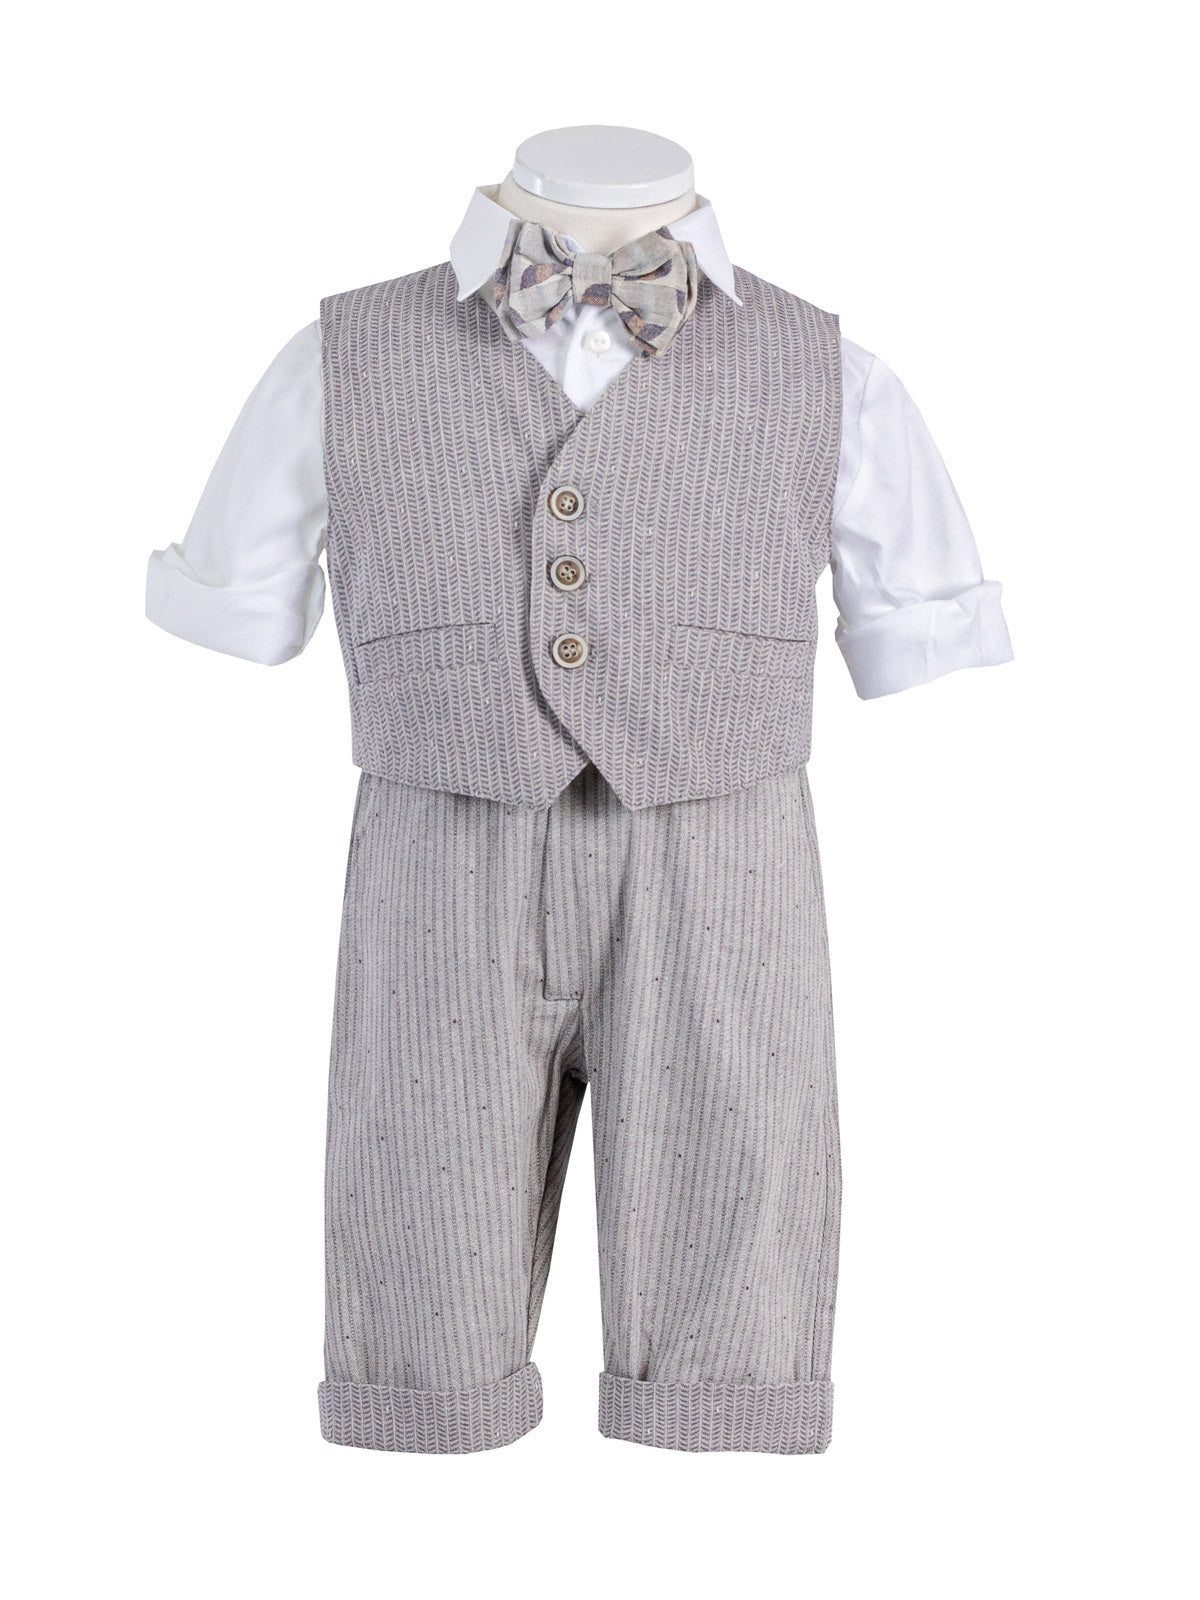 Baby suit with checkered pattern for boy - POTTER